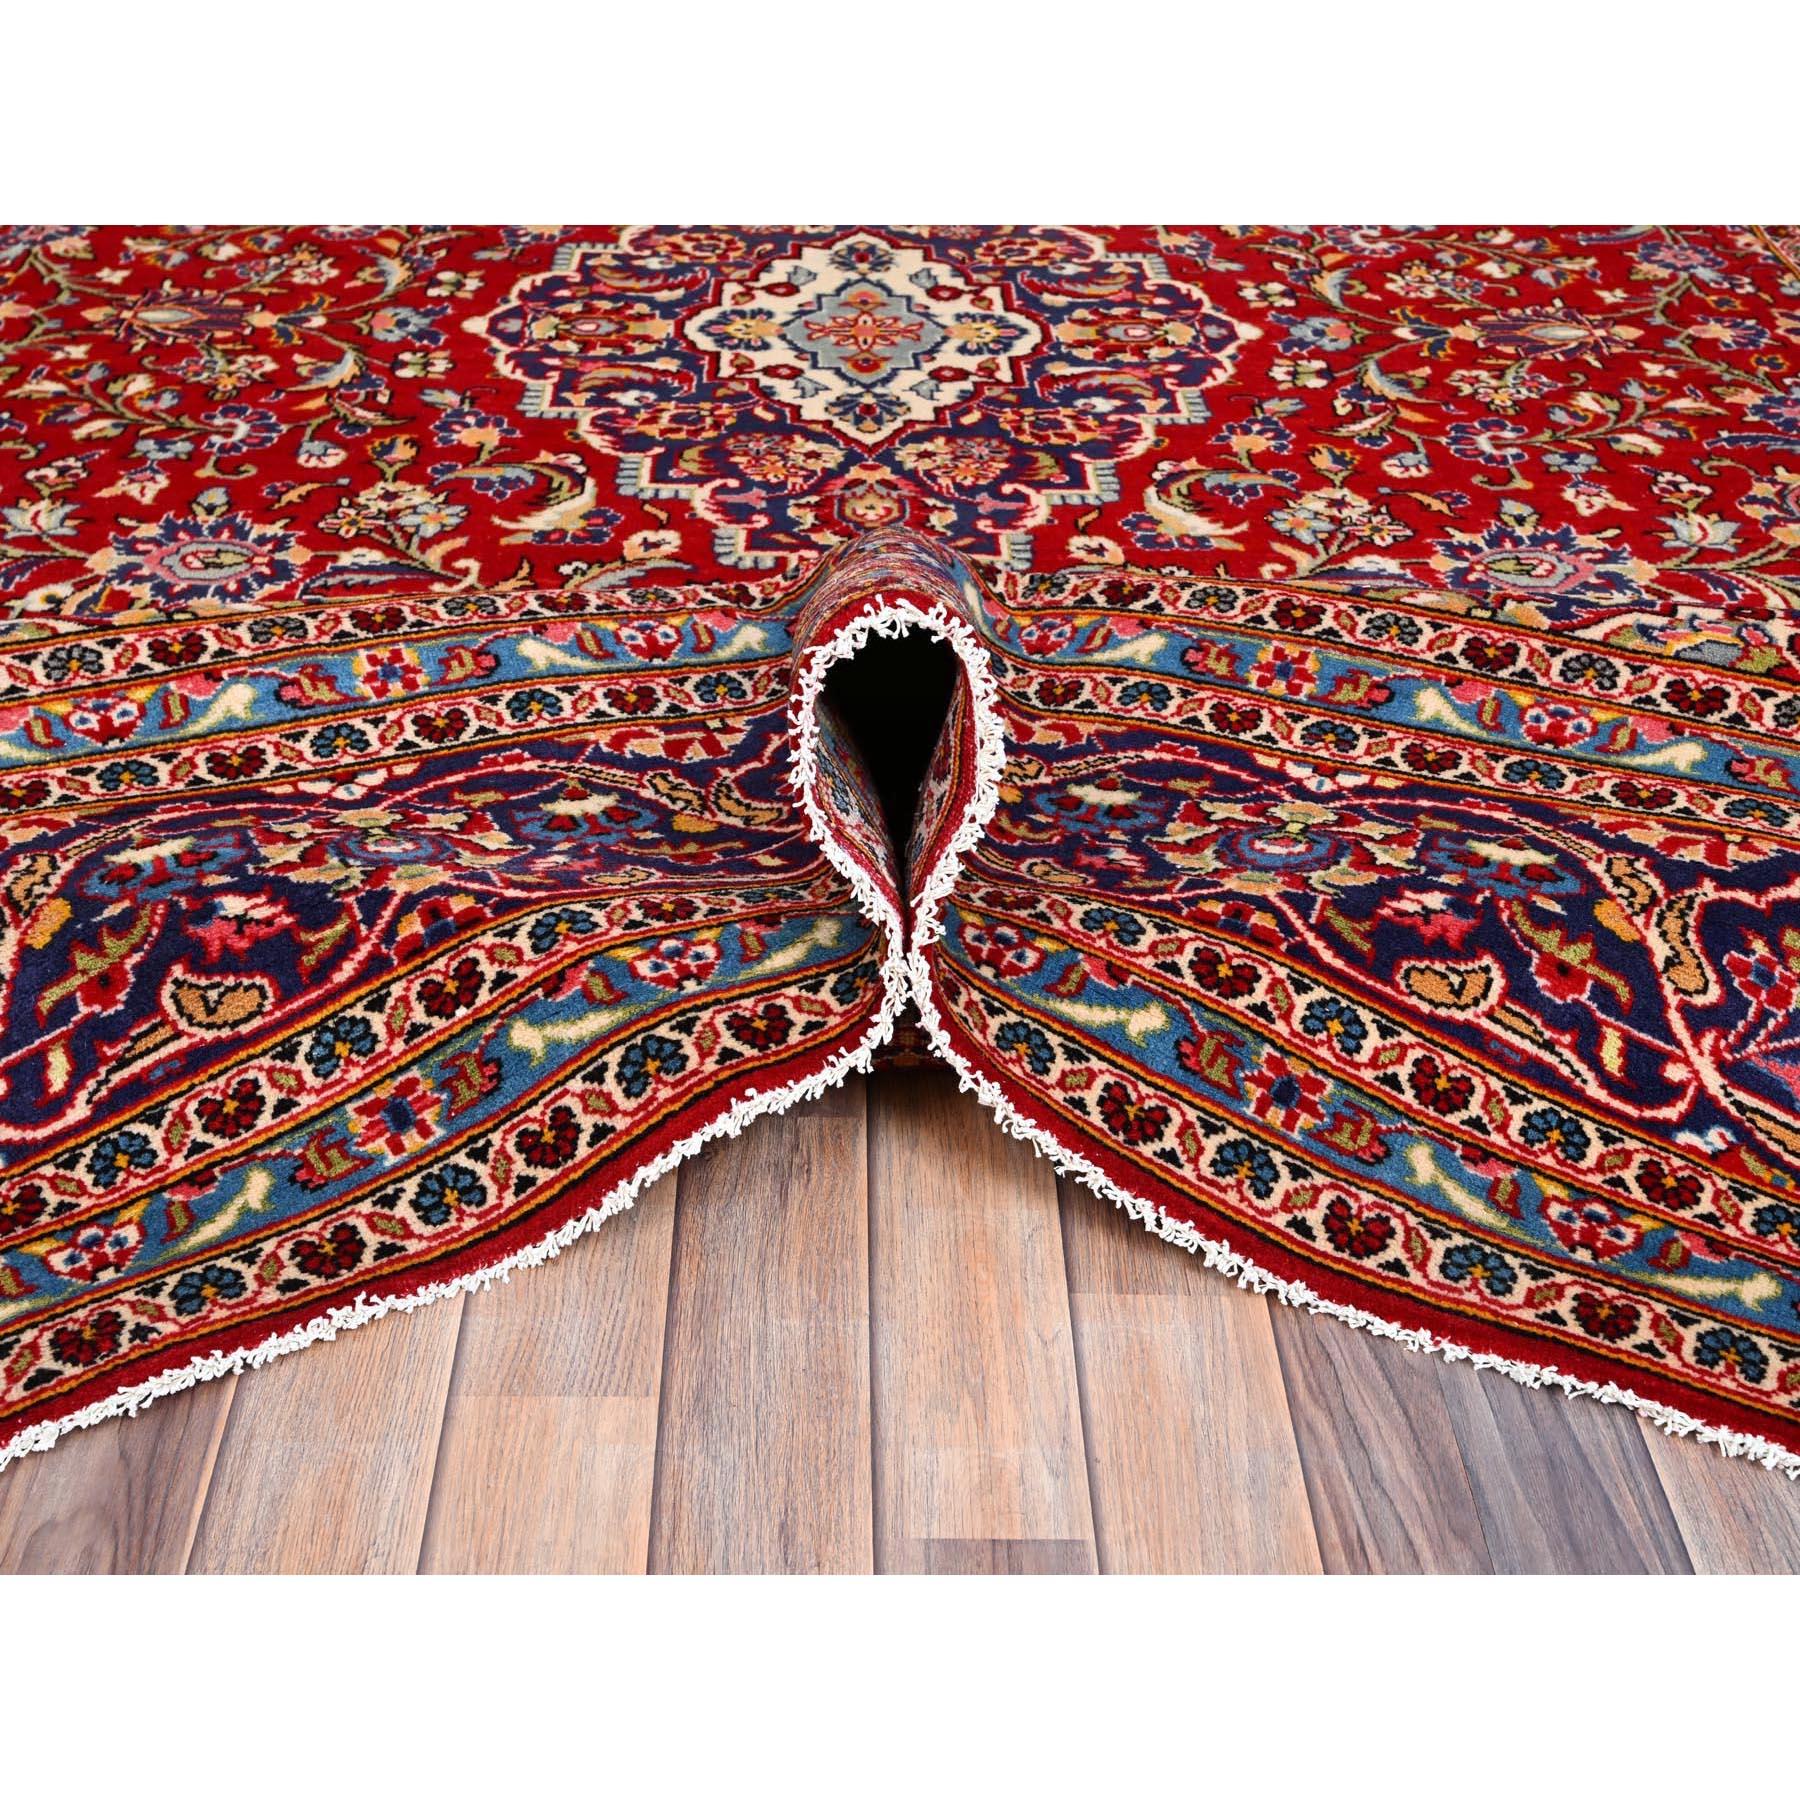 Mid-20th Century Red Clean Soft Vintage Persian Kashan Full Pile Hand Knotted Organic Wool Rug